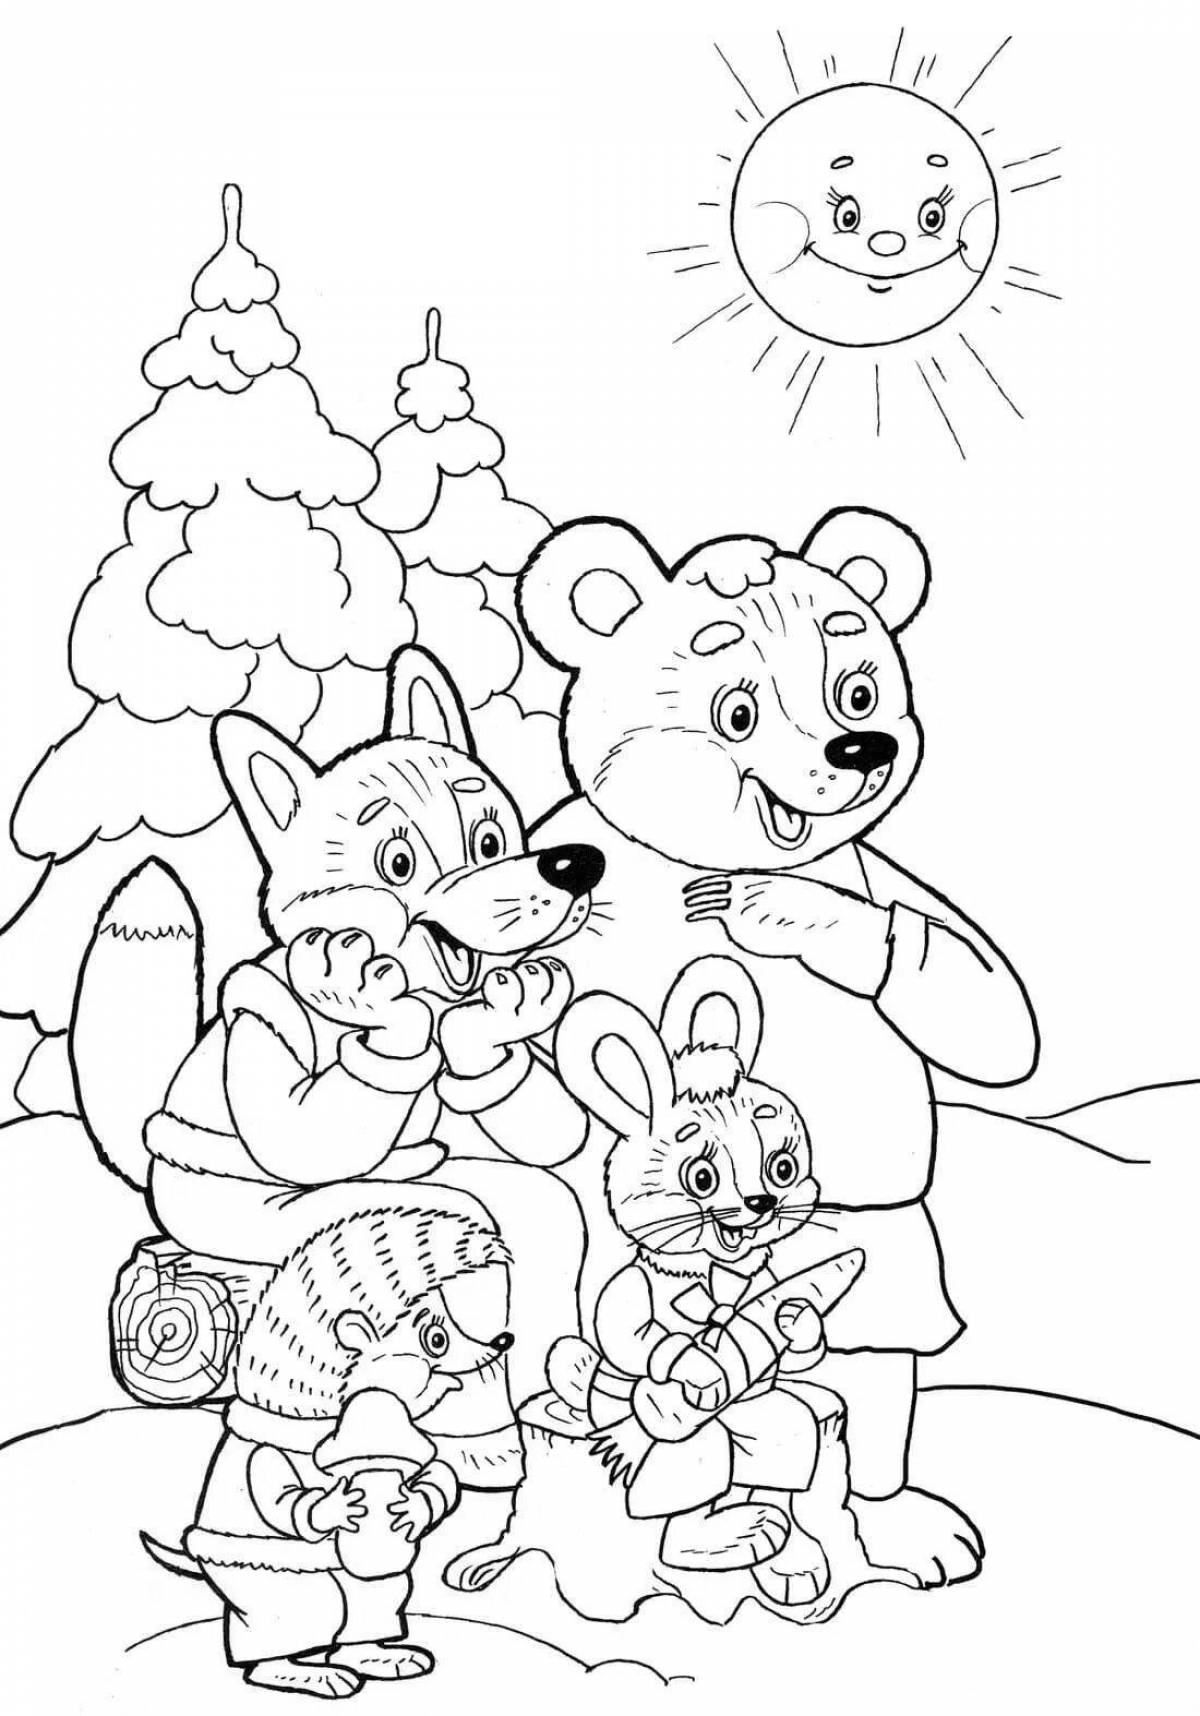 Coloring book radiant bear and fox